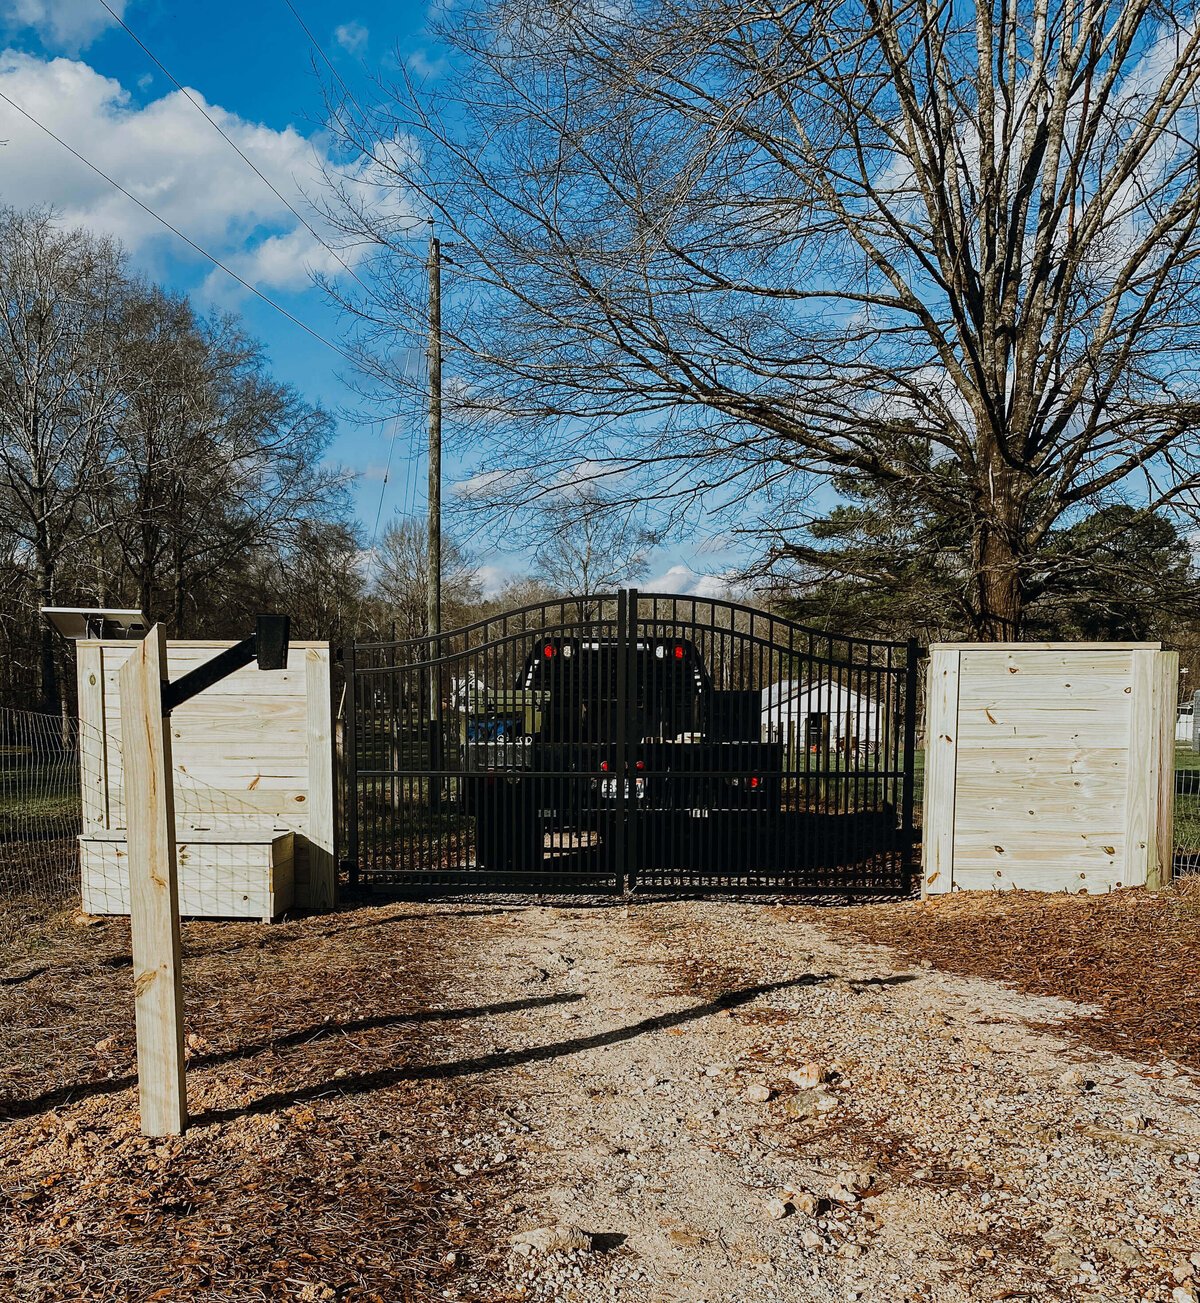 truck-driving-on-gravel-path-through-entrance-gate-under-large-tree-and-blue-skies